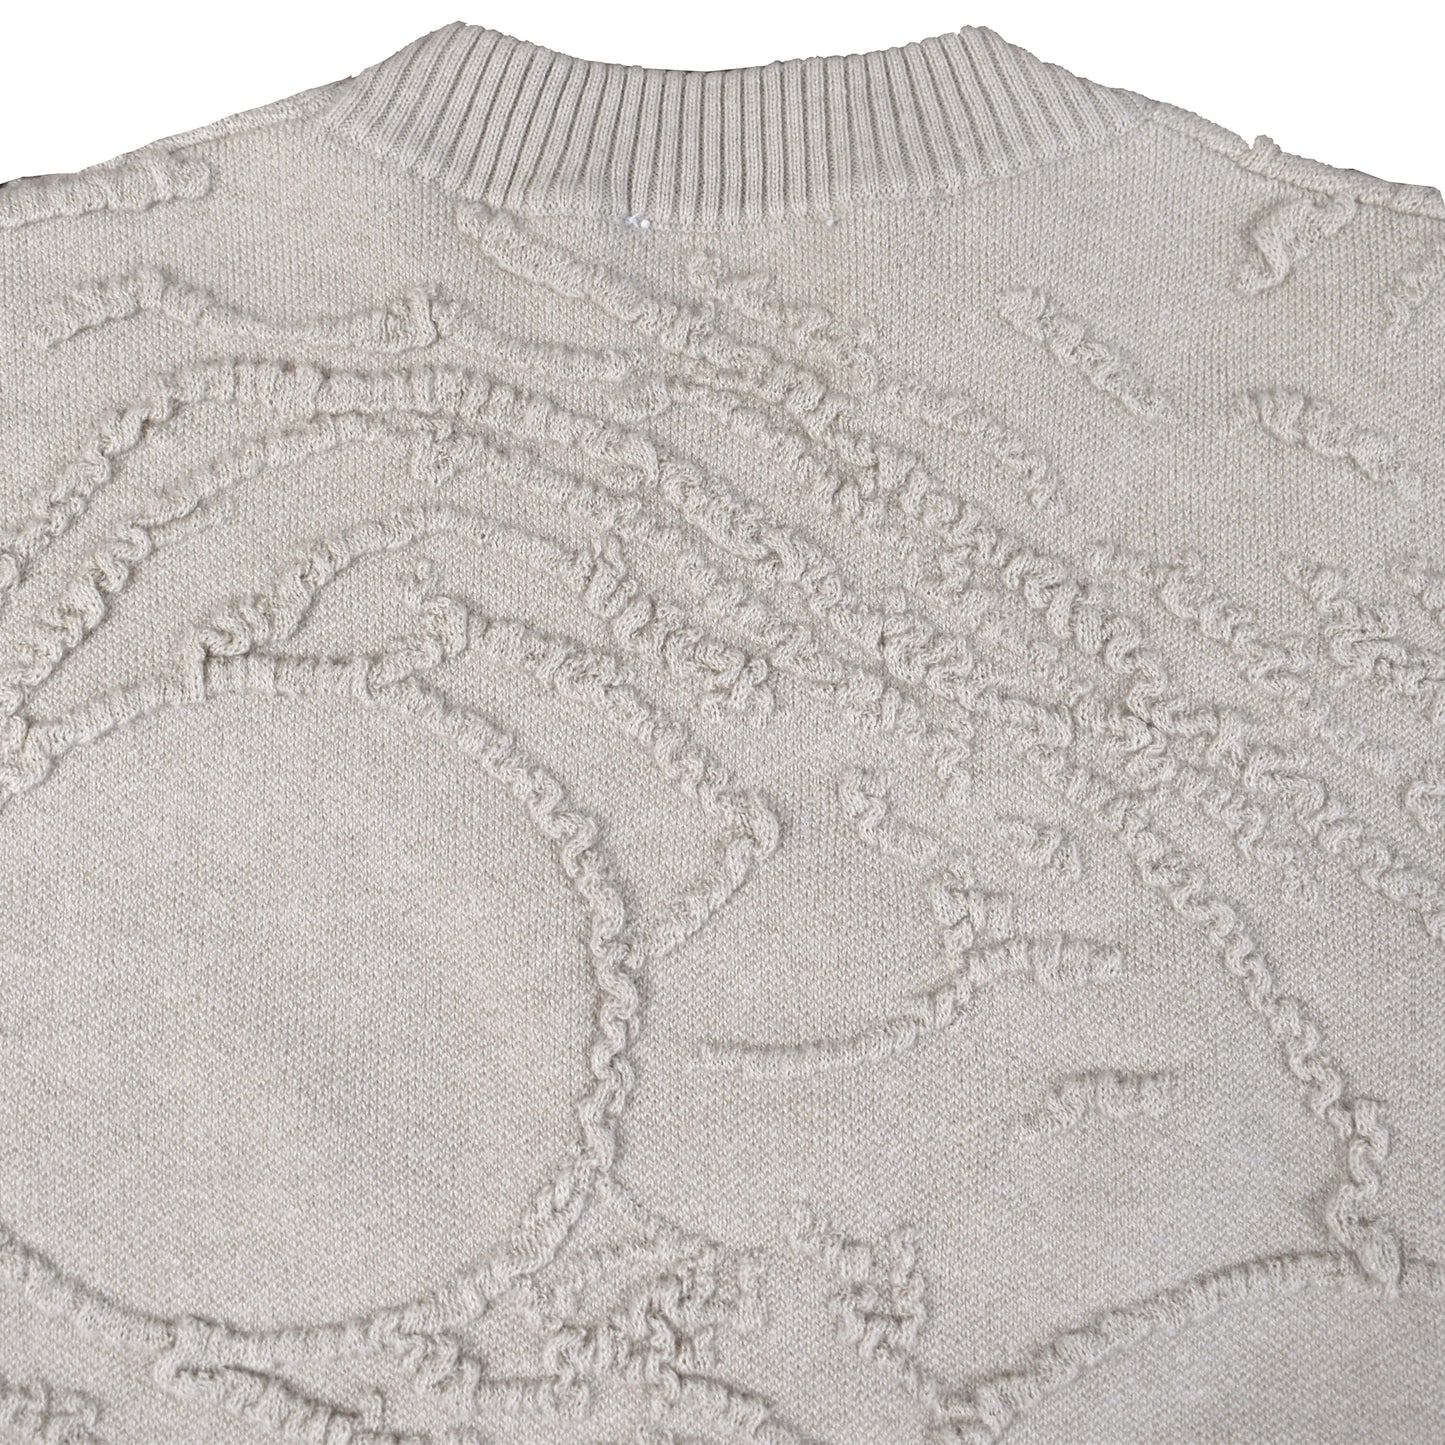 "TERRAIN" CABLE KNIT SWEATER